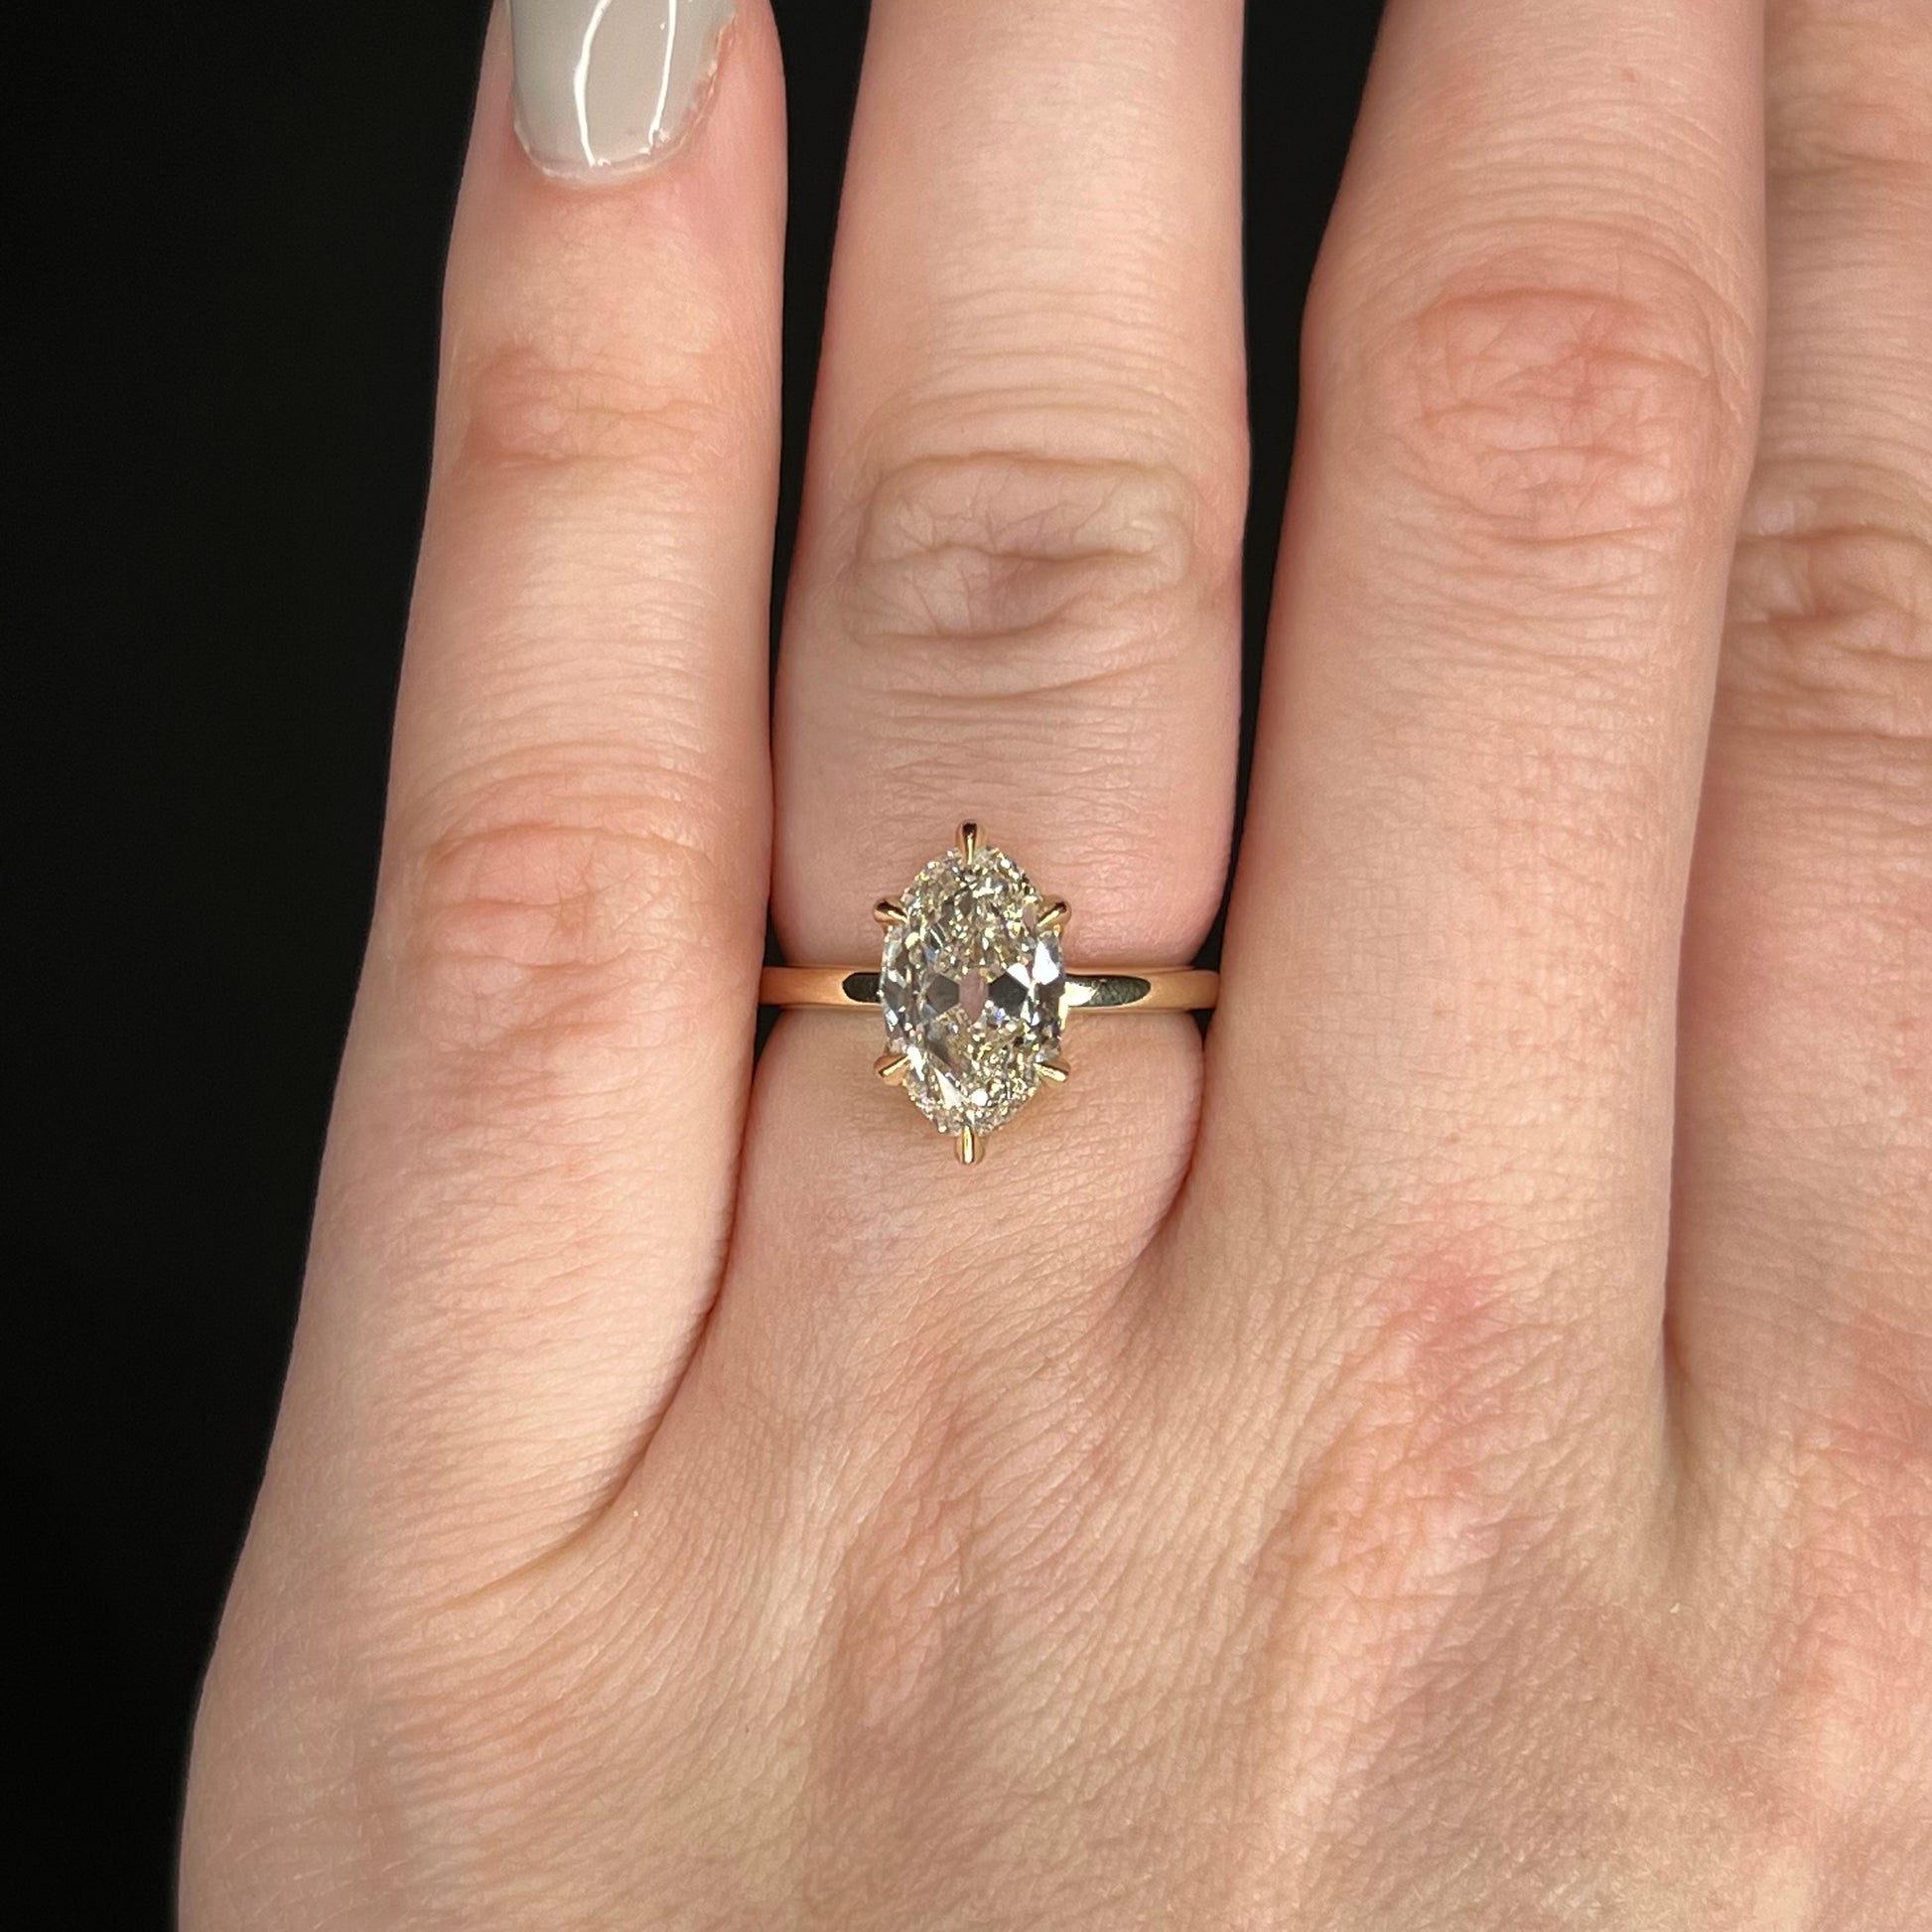 3.04 Oval Cut Diamond Engagement Ring in 14k Yellow GoldComposition: 14 Karat Yellow Gold Ring Size: 6.25 Total Diamond Weight: 3.04ct Total Gram Weight: 3.8 g Inscription: 14k
      